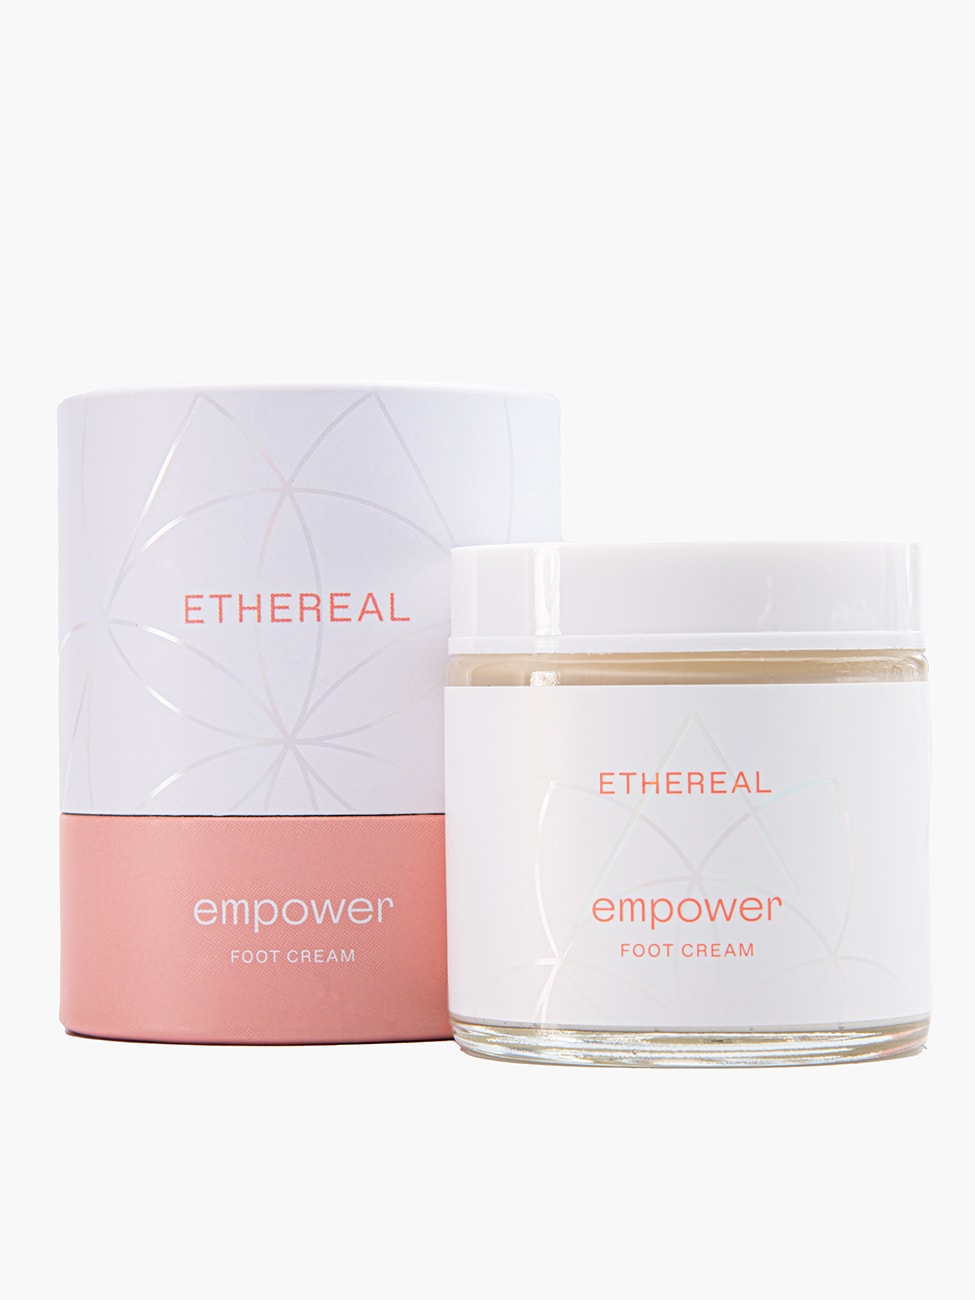 Empower_Cream_Package_Ethereal_Dermocosmetics_Skincare_Handmade_Greek_Products